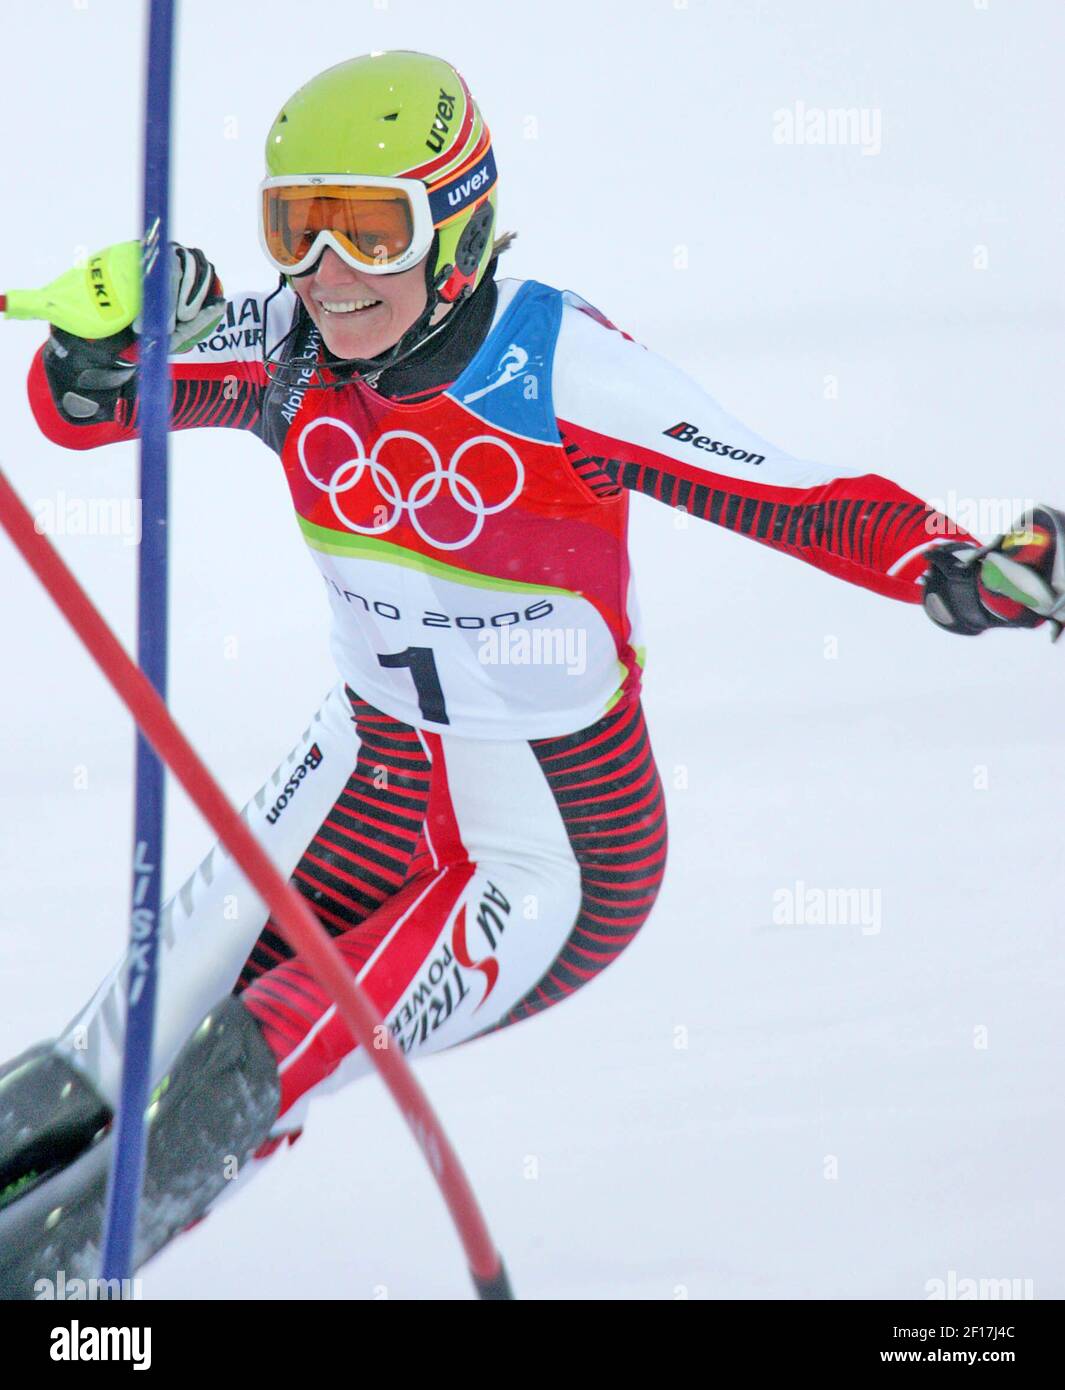 Marlies Schild of Austria rounds a gate during the ladies combined slalom competition at the Turin 2006 Winter Olympic Games in San Sestriere Colle, Italy Friday February 17, 2006. (Ron Jenkins./ Fort Worth Star-Telegram/ KRT) Stock Photo